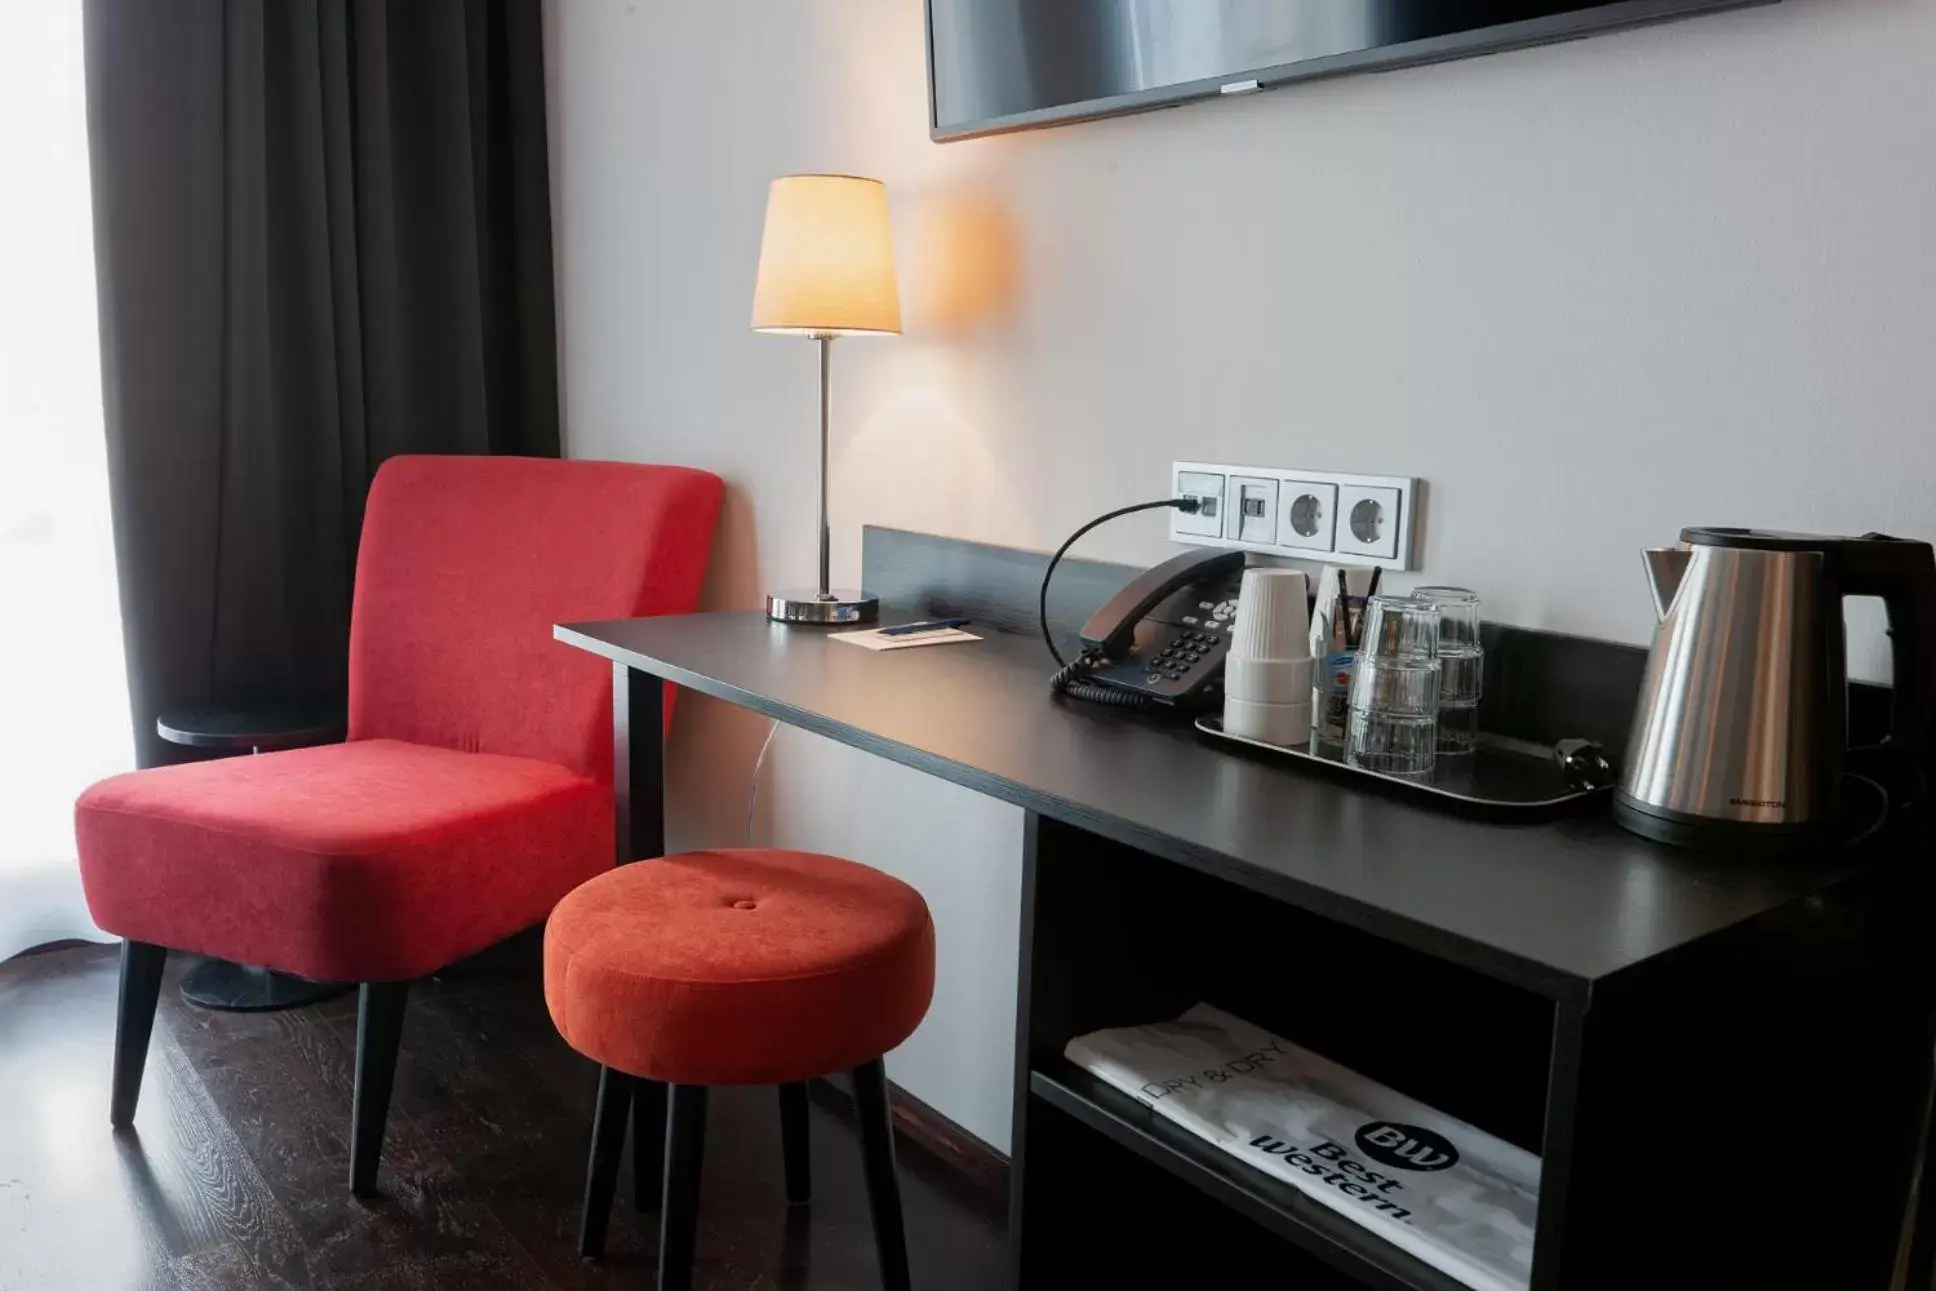 Best Western Malmo Arena Hotel